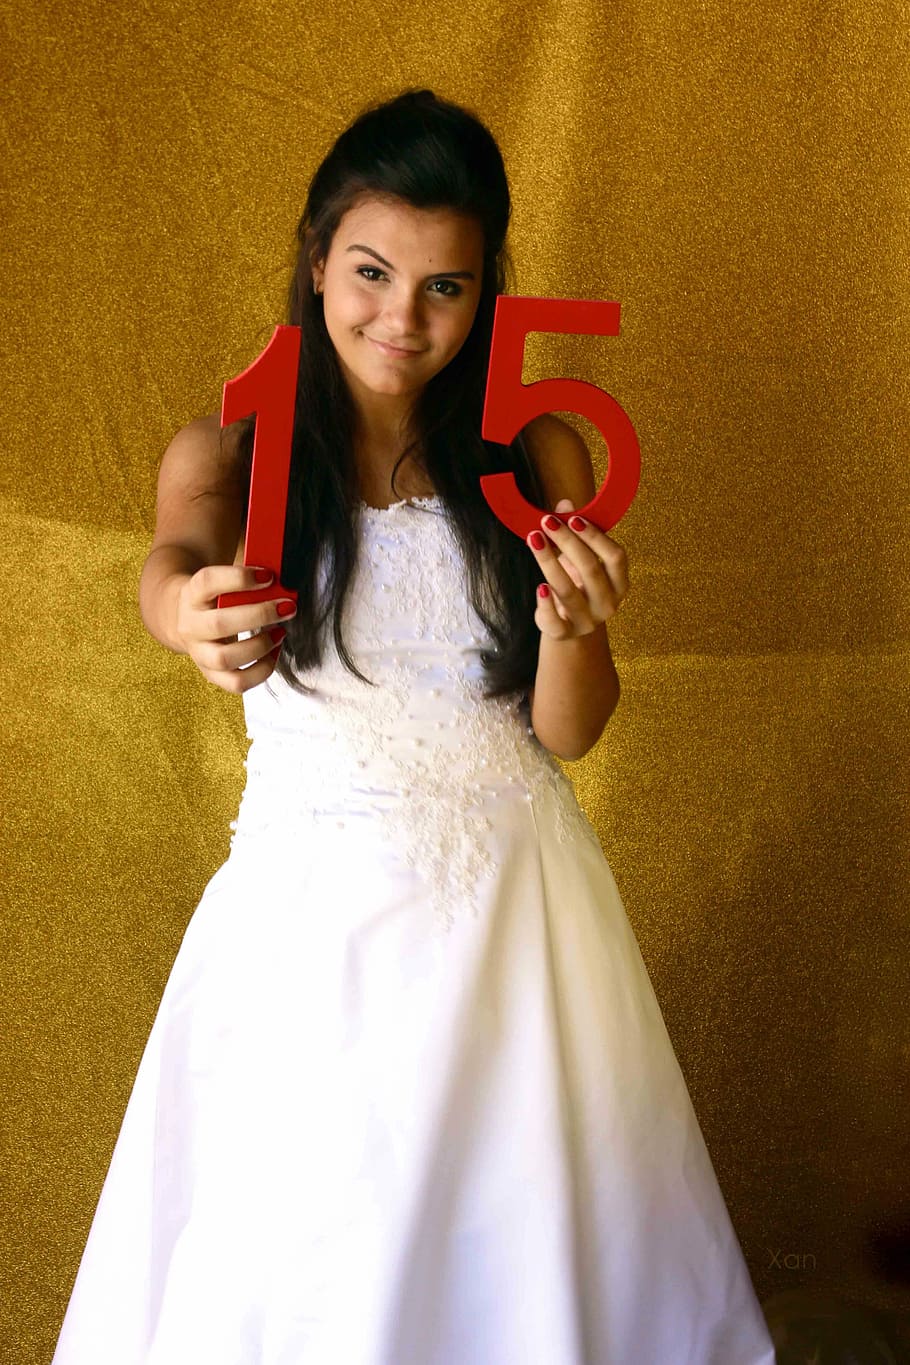 woman, holding, number 15 marquee decors, dreaming, teen party, portrait, birthday, girl, dress, celebration